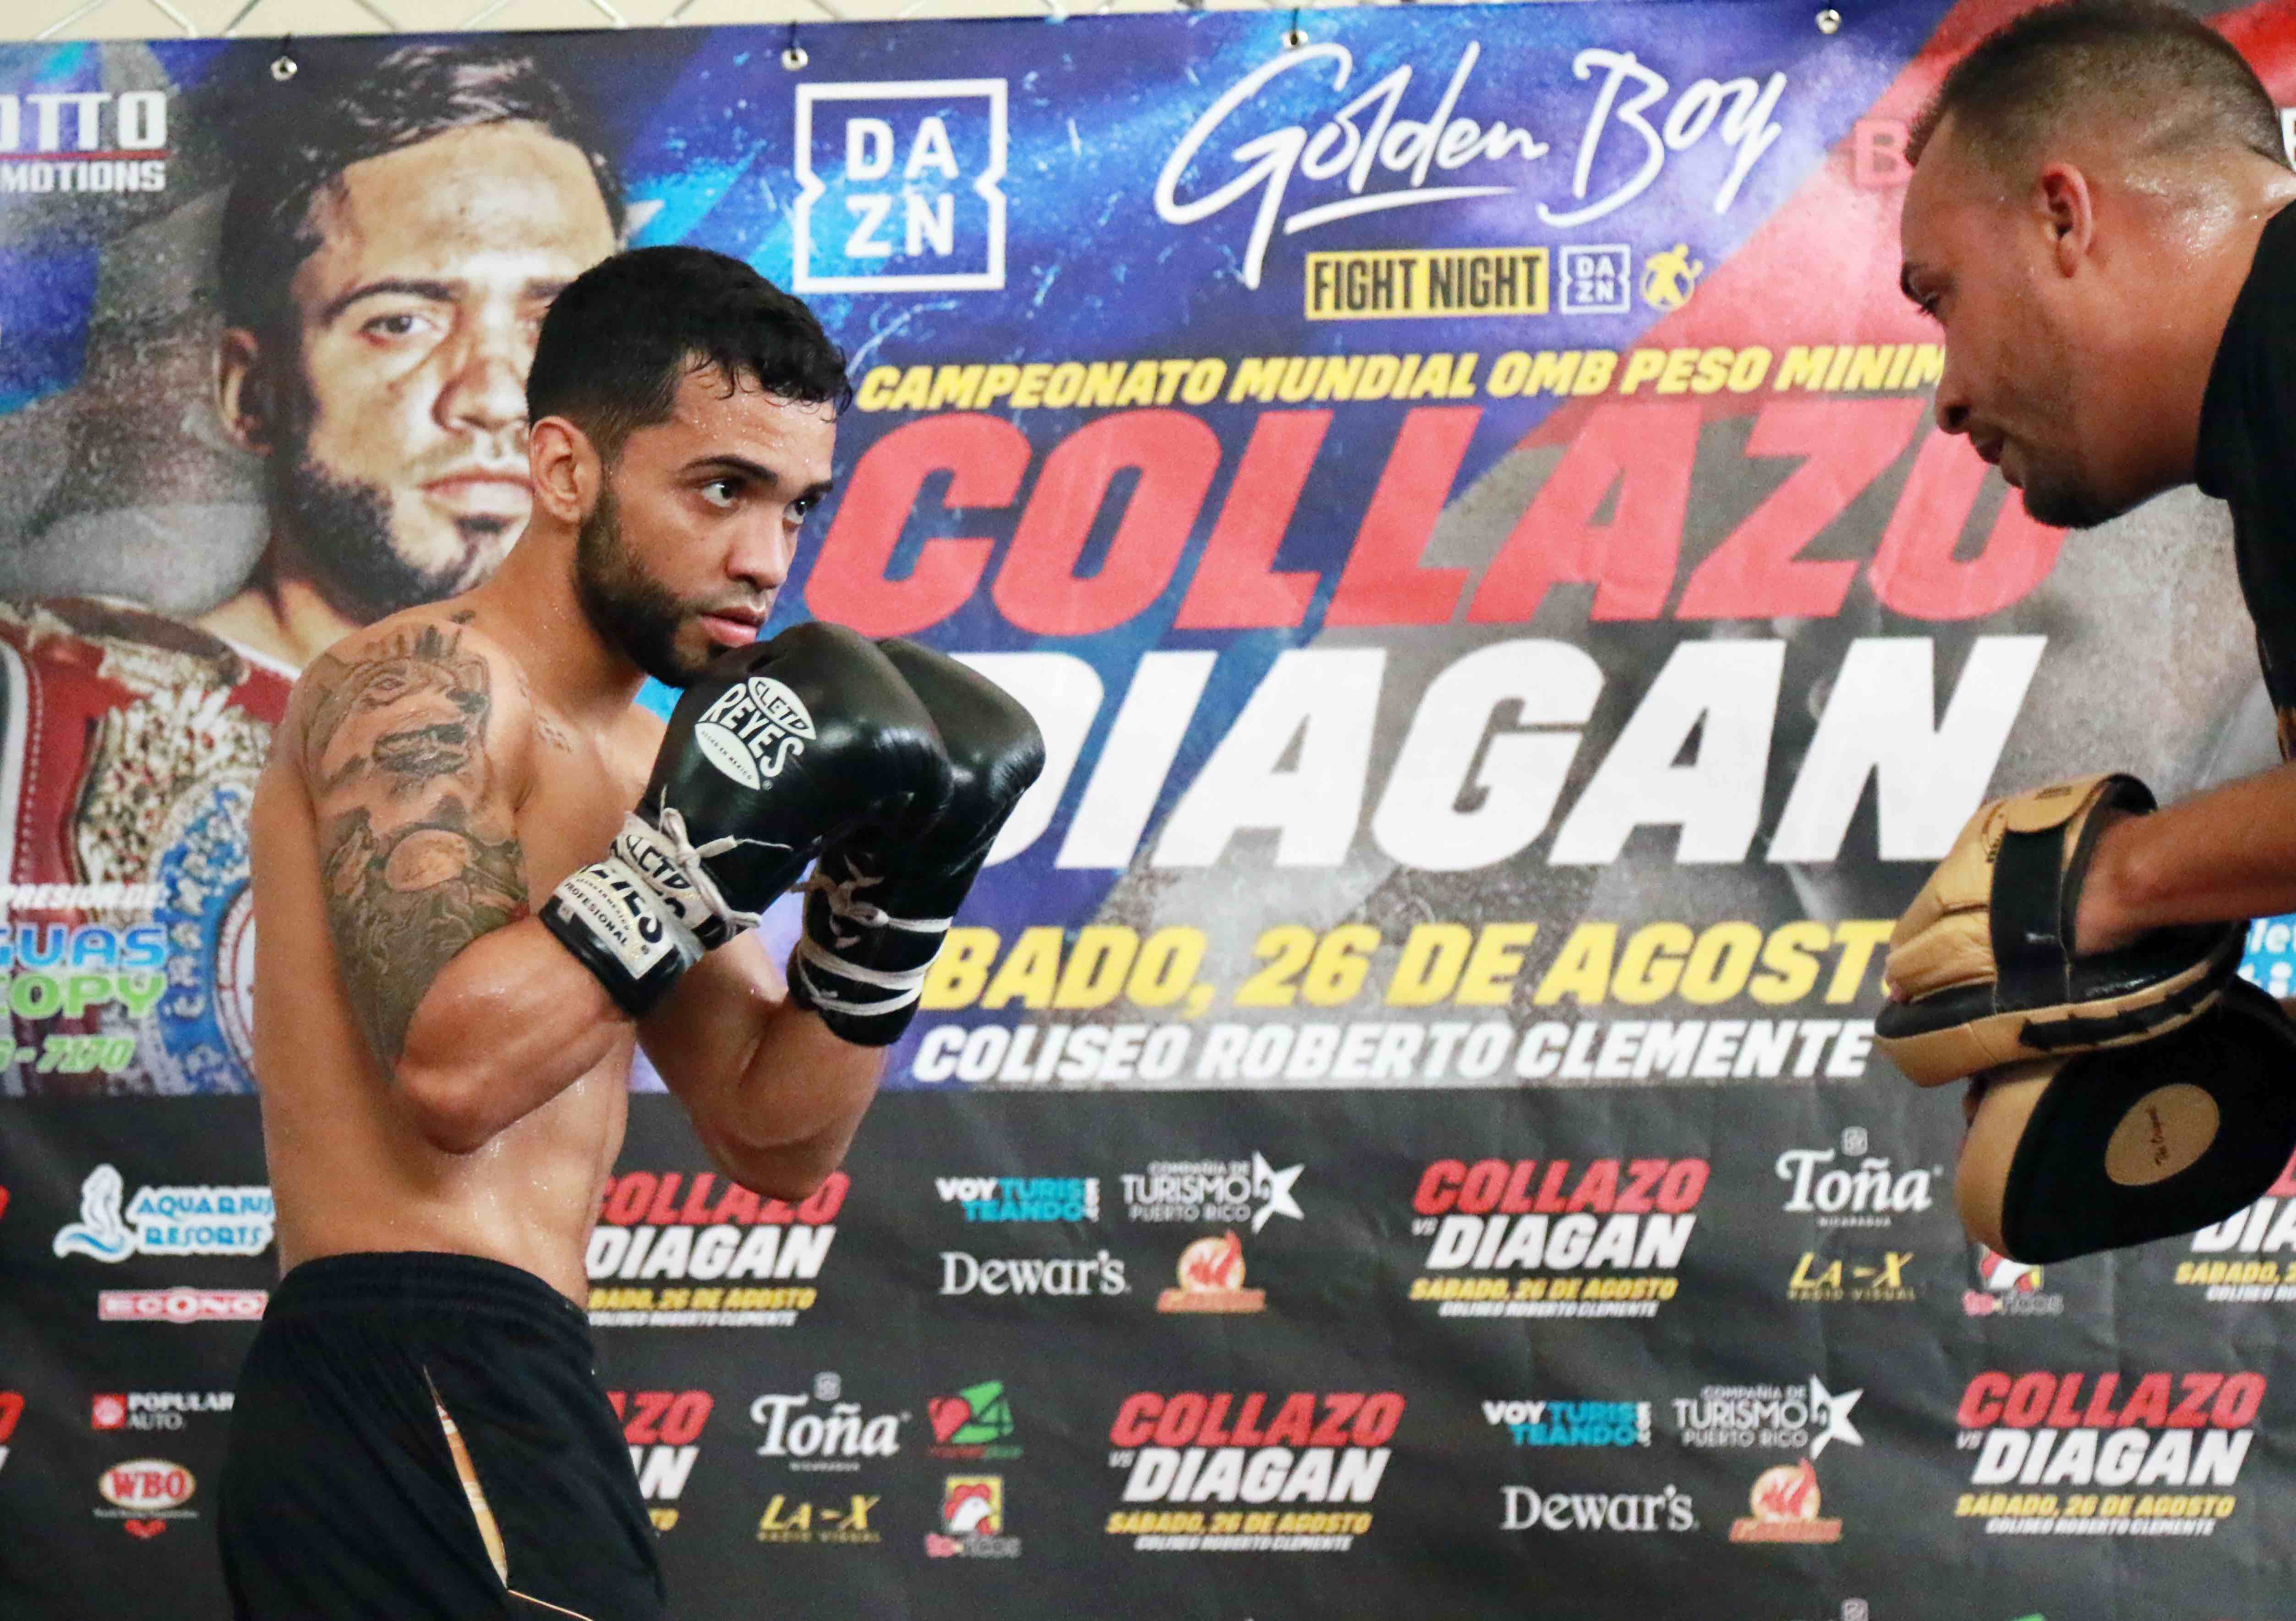 Collazo returns to Puerto Rico a champion on August 26th